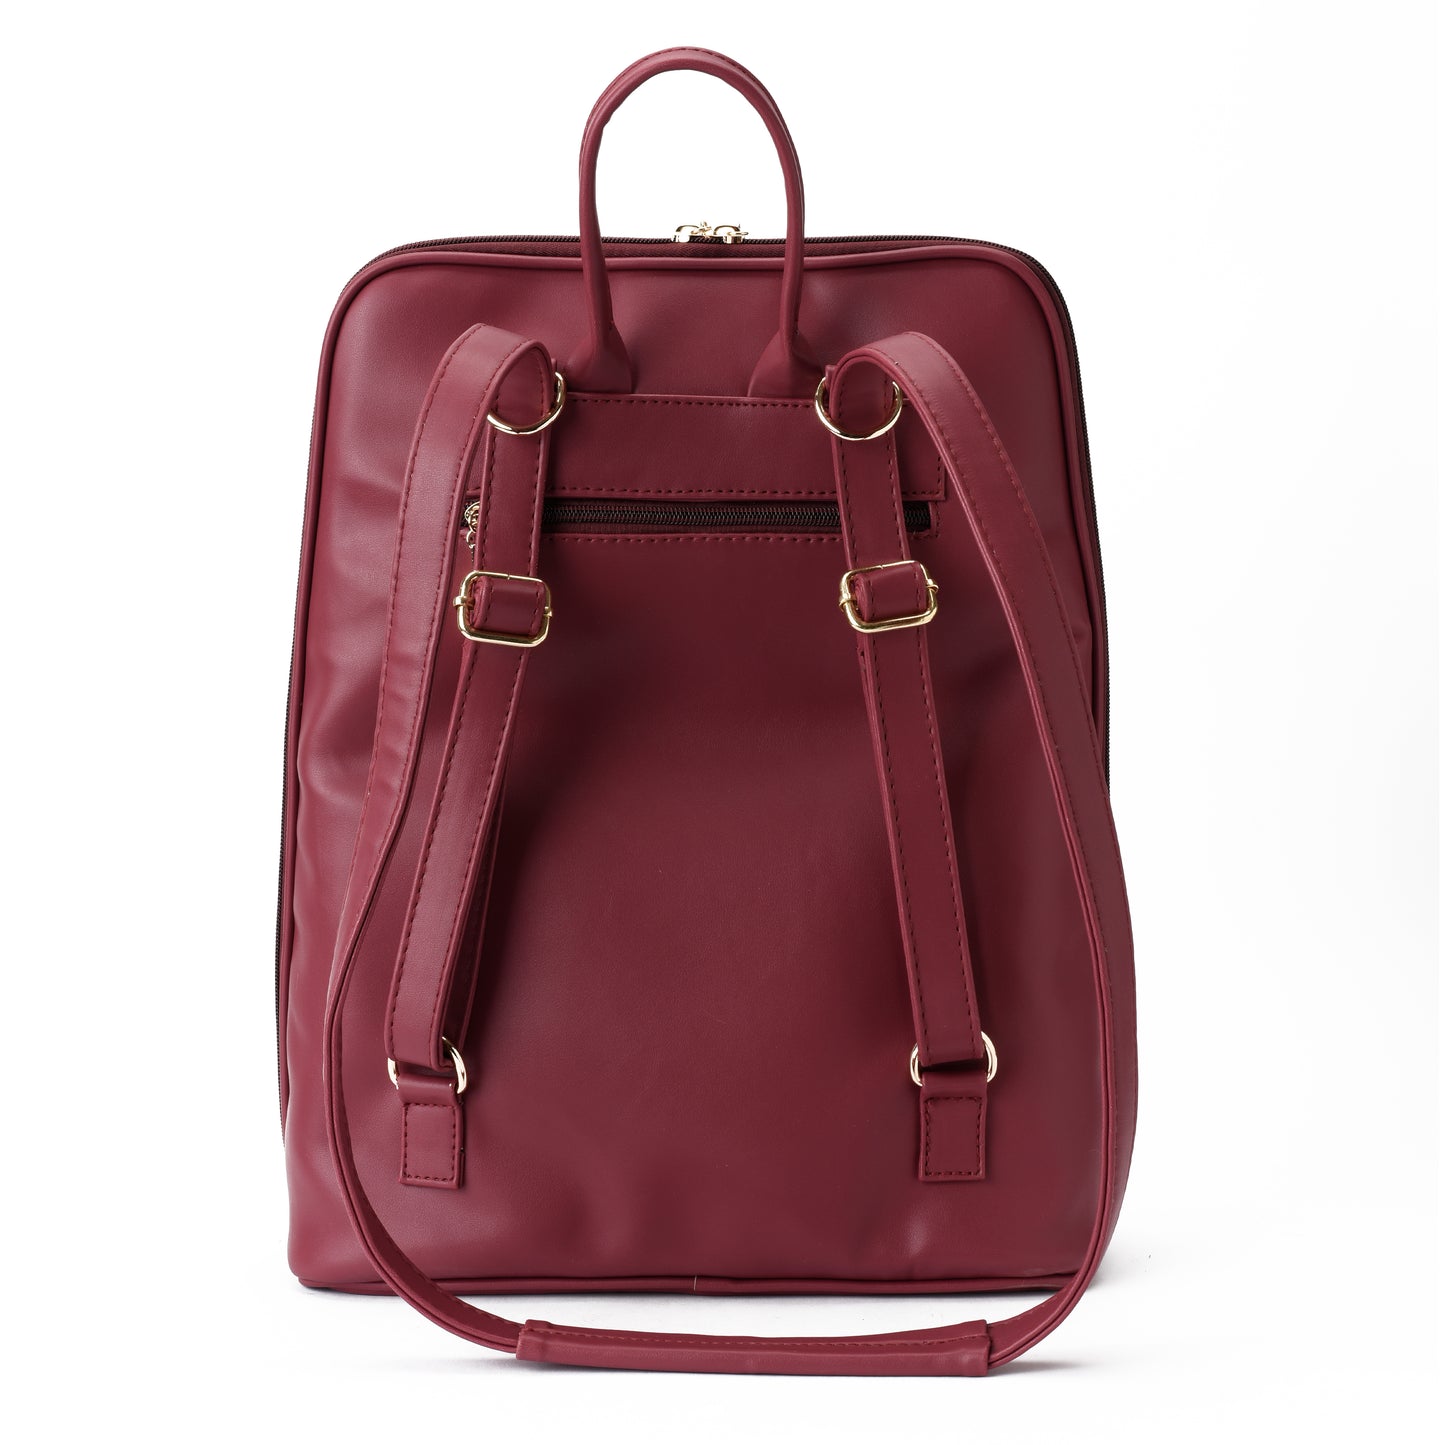 Burgundy Lily Laptop Backpack/Cross